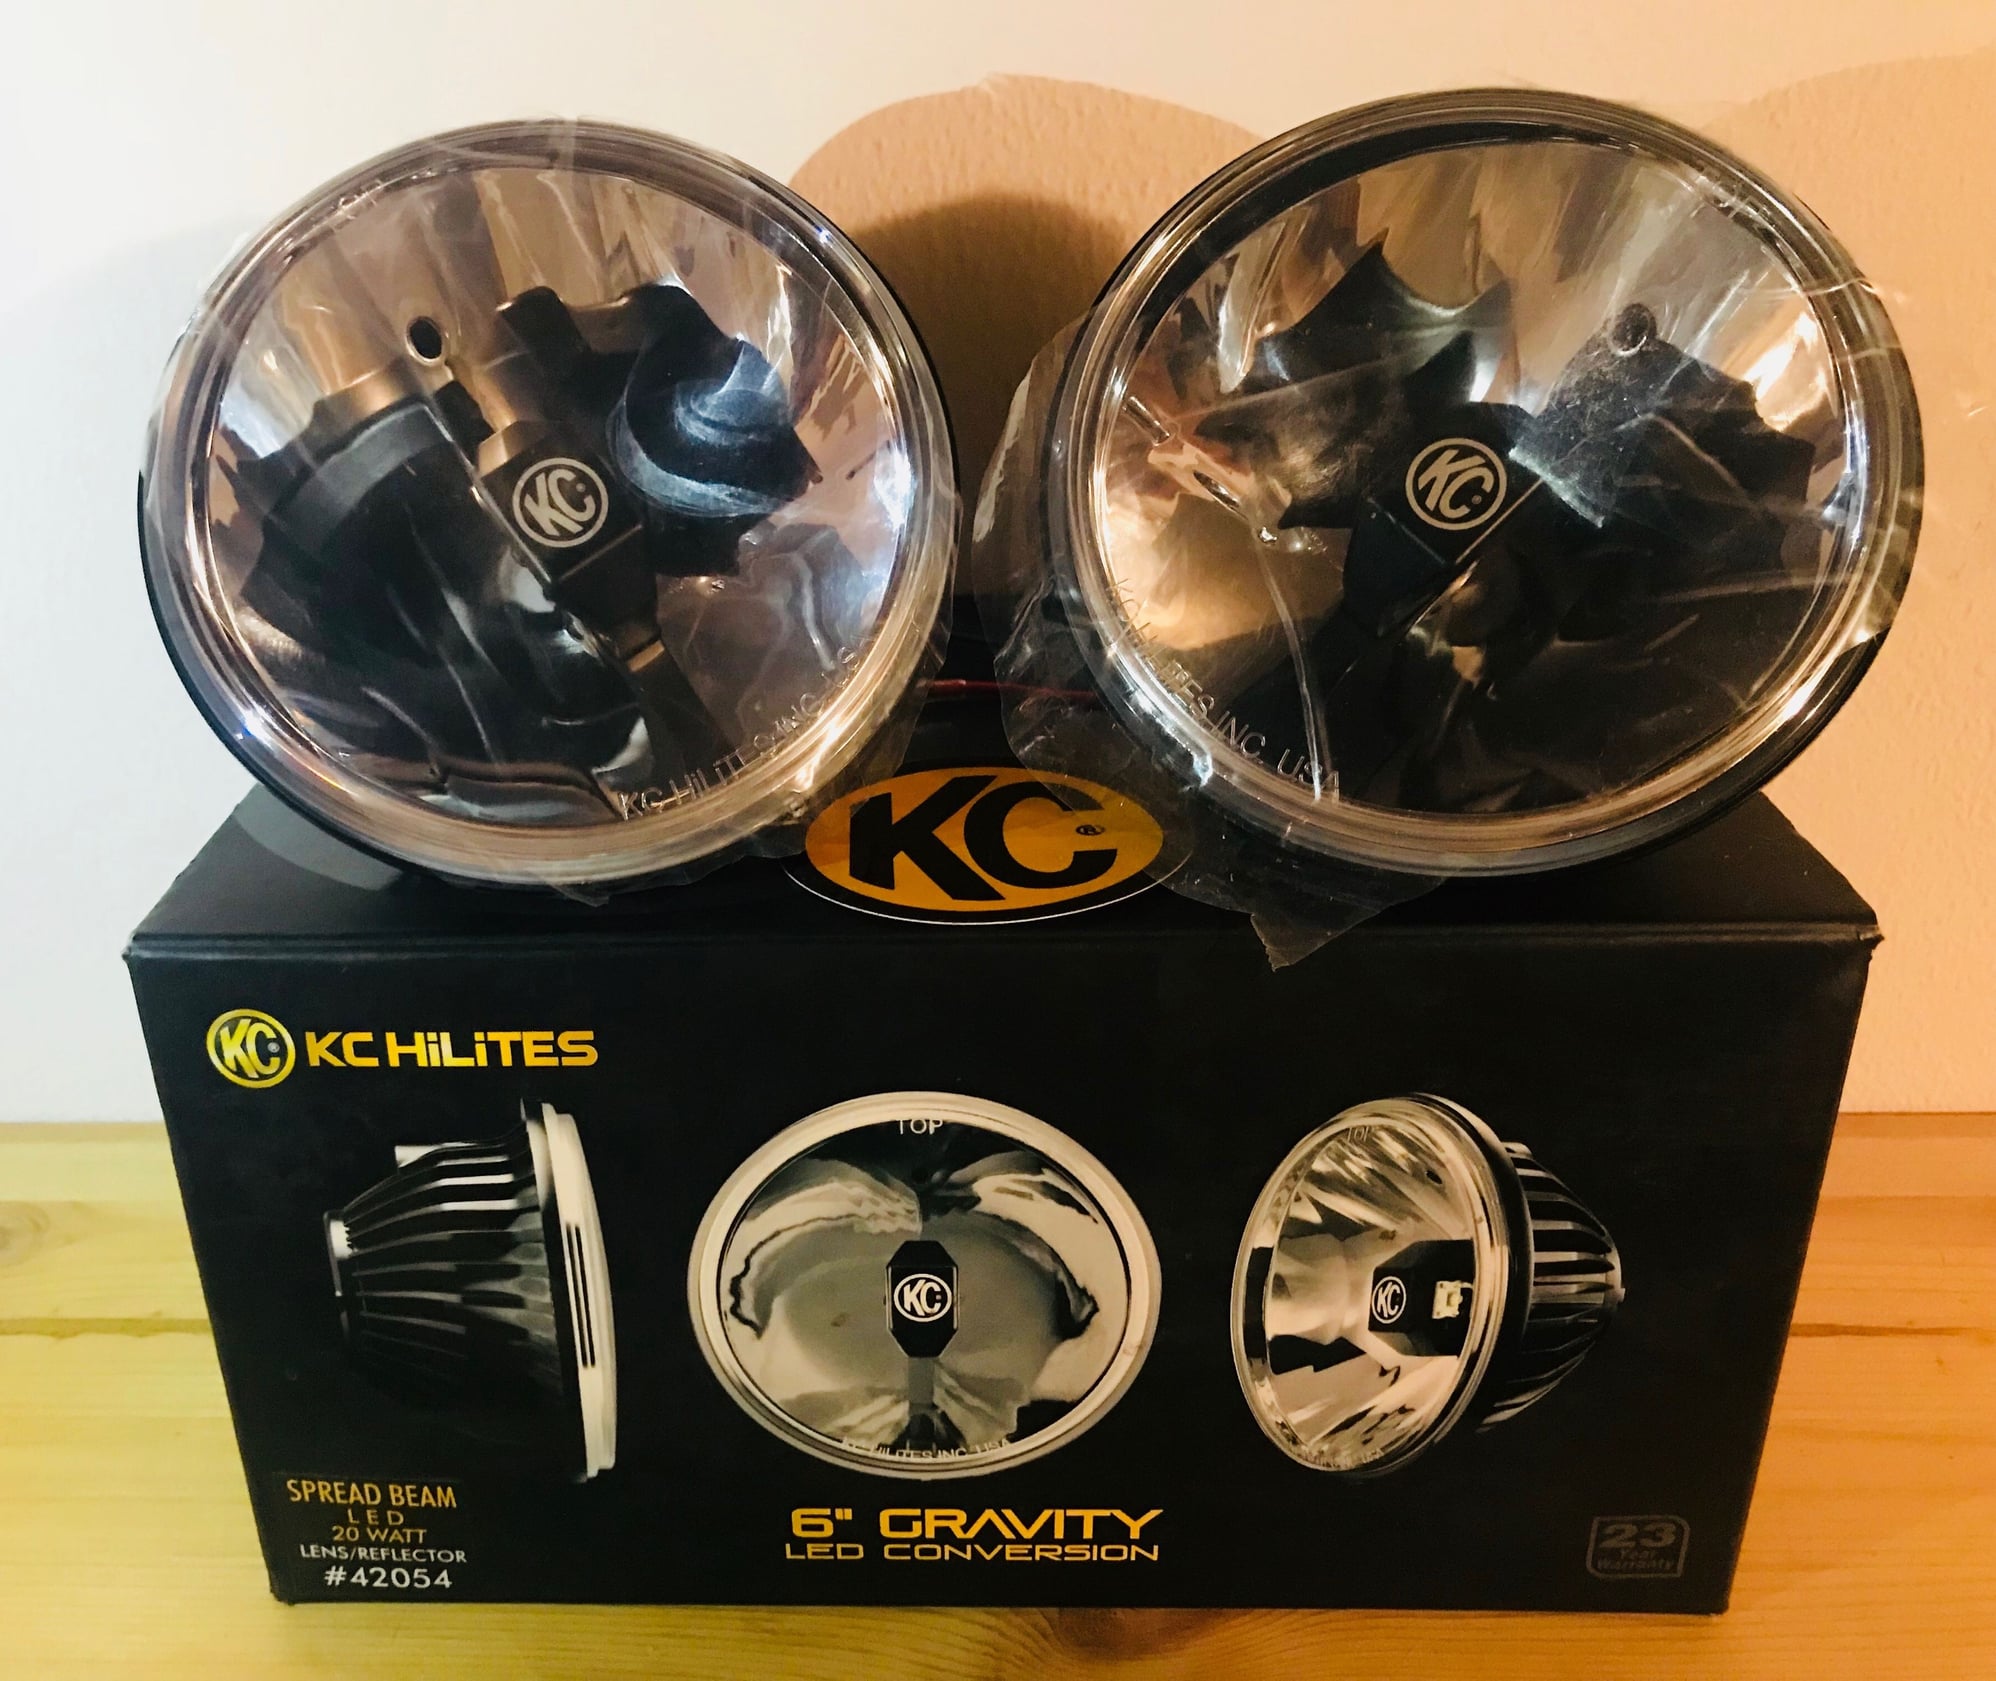 Lights - 42054 gravity 6" led drop in KC hilites DOT approved driving. Brand new. - New - Lomita, CA 90717, United States